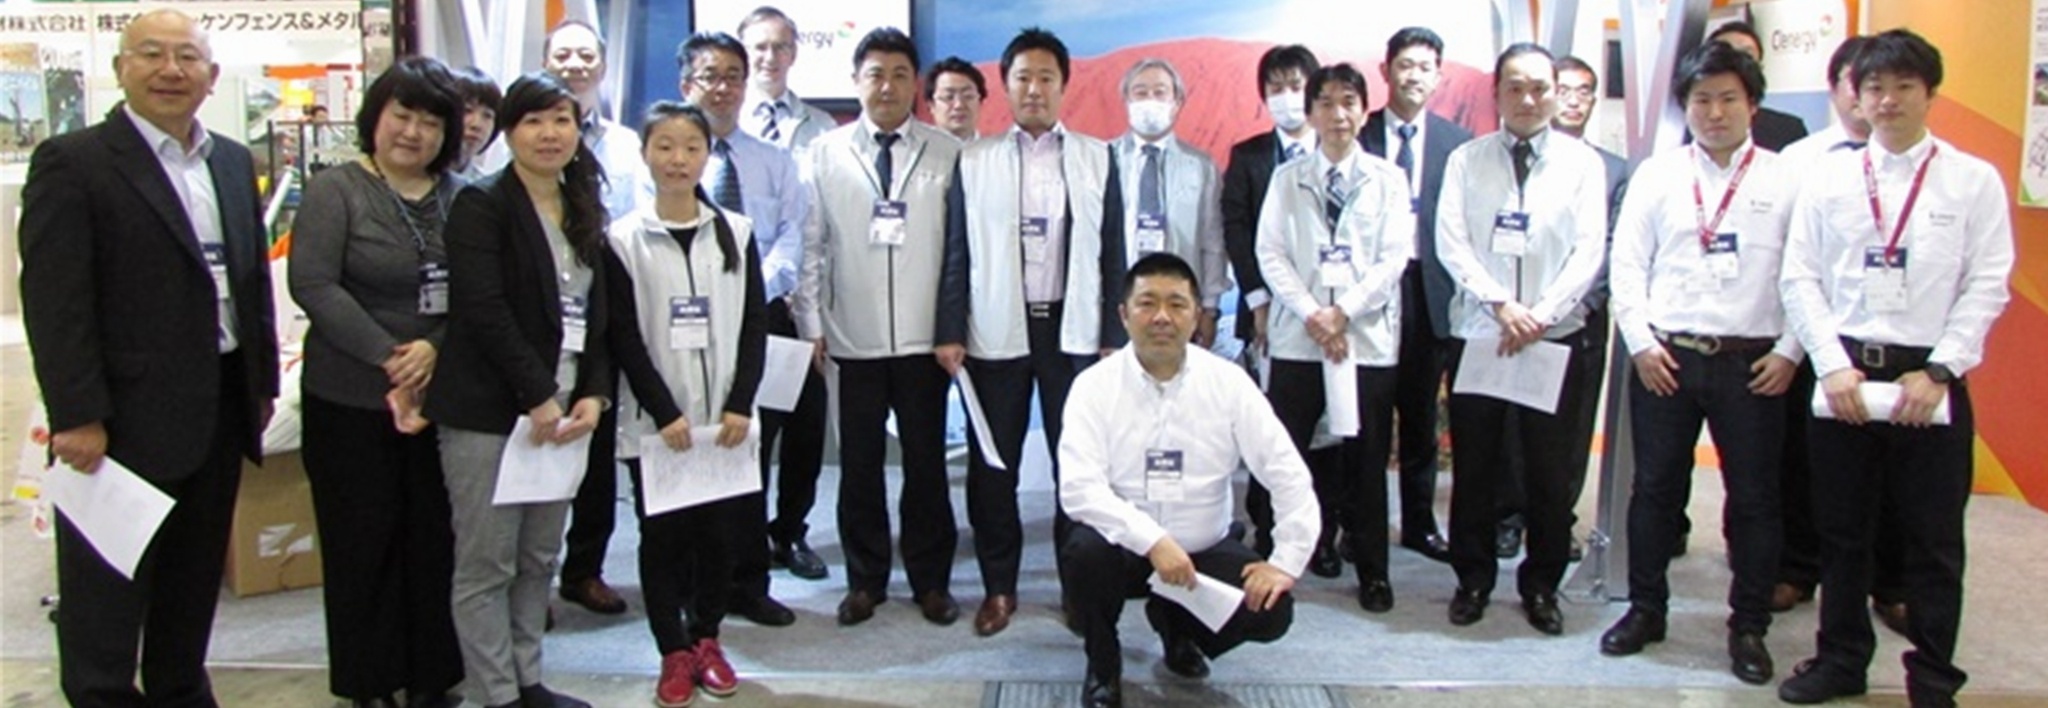 Clenergy Team at the PV EXPO 2015 in Tokyo